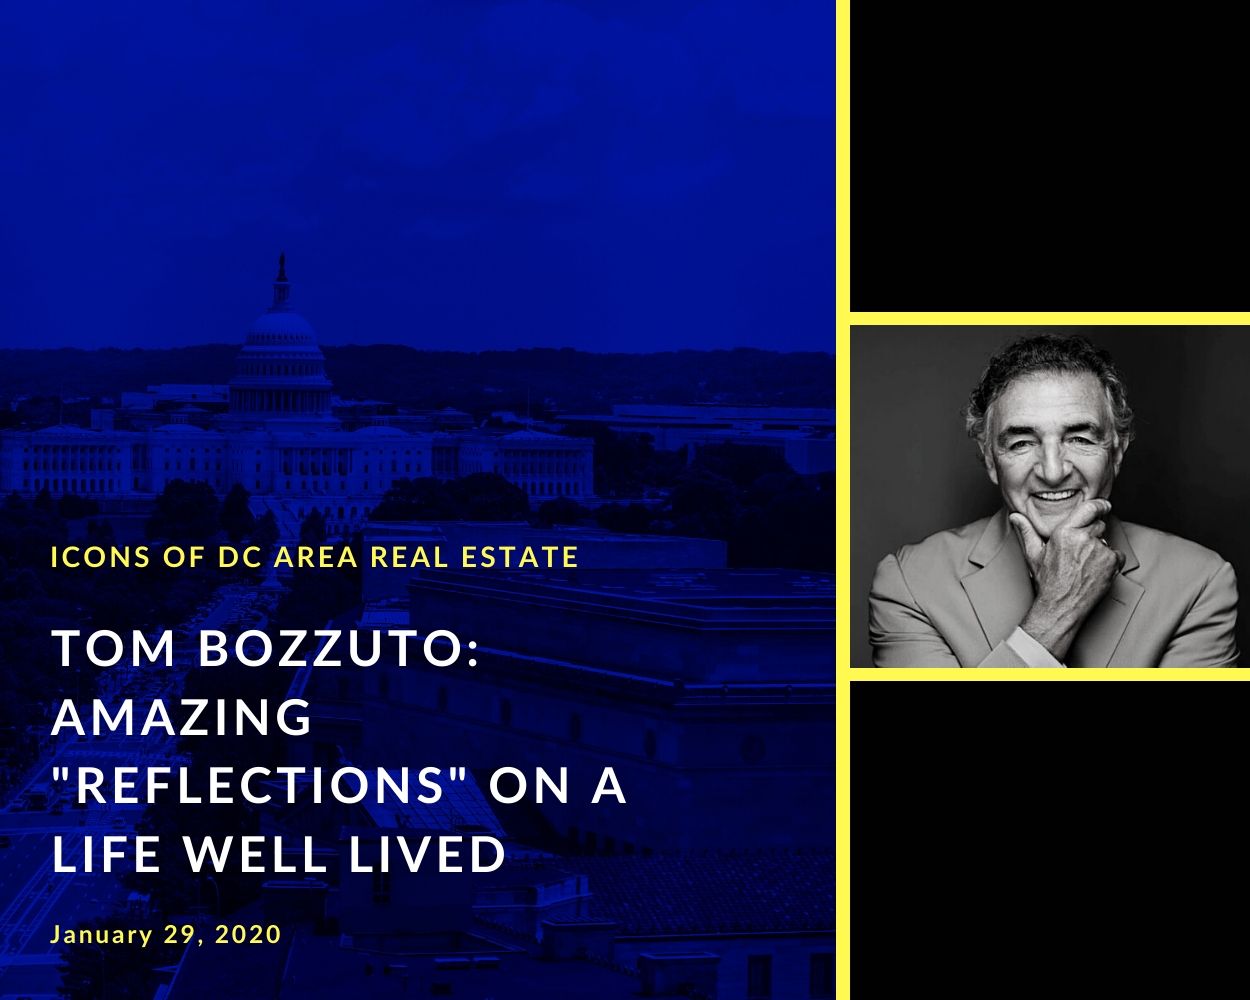 Tom Bozzuto-Amazing "Reflections" on a Life Well Lived (#9)